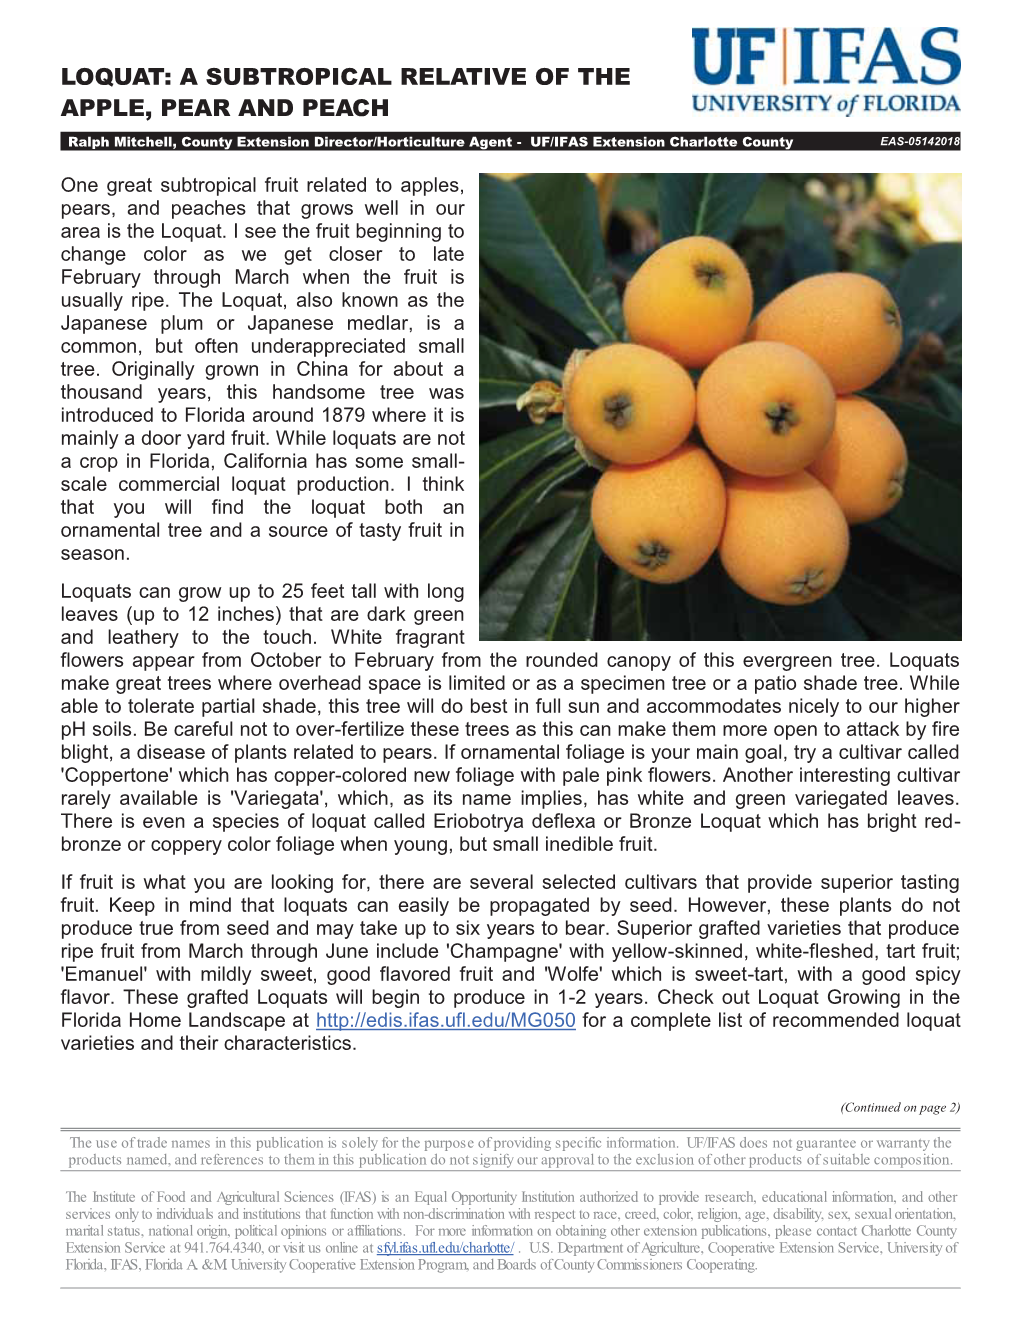 Loquat: a Subtropical Relative of the Apple, Pear and Peach